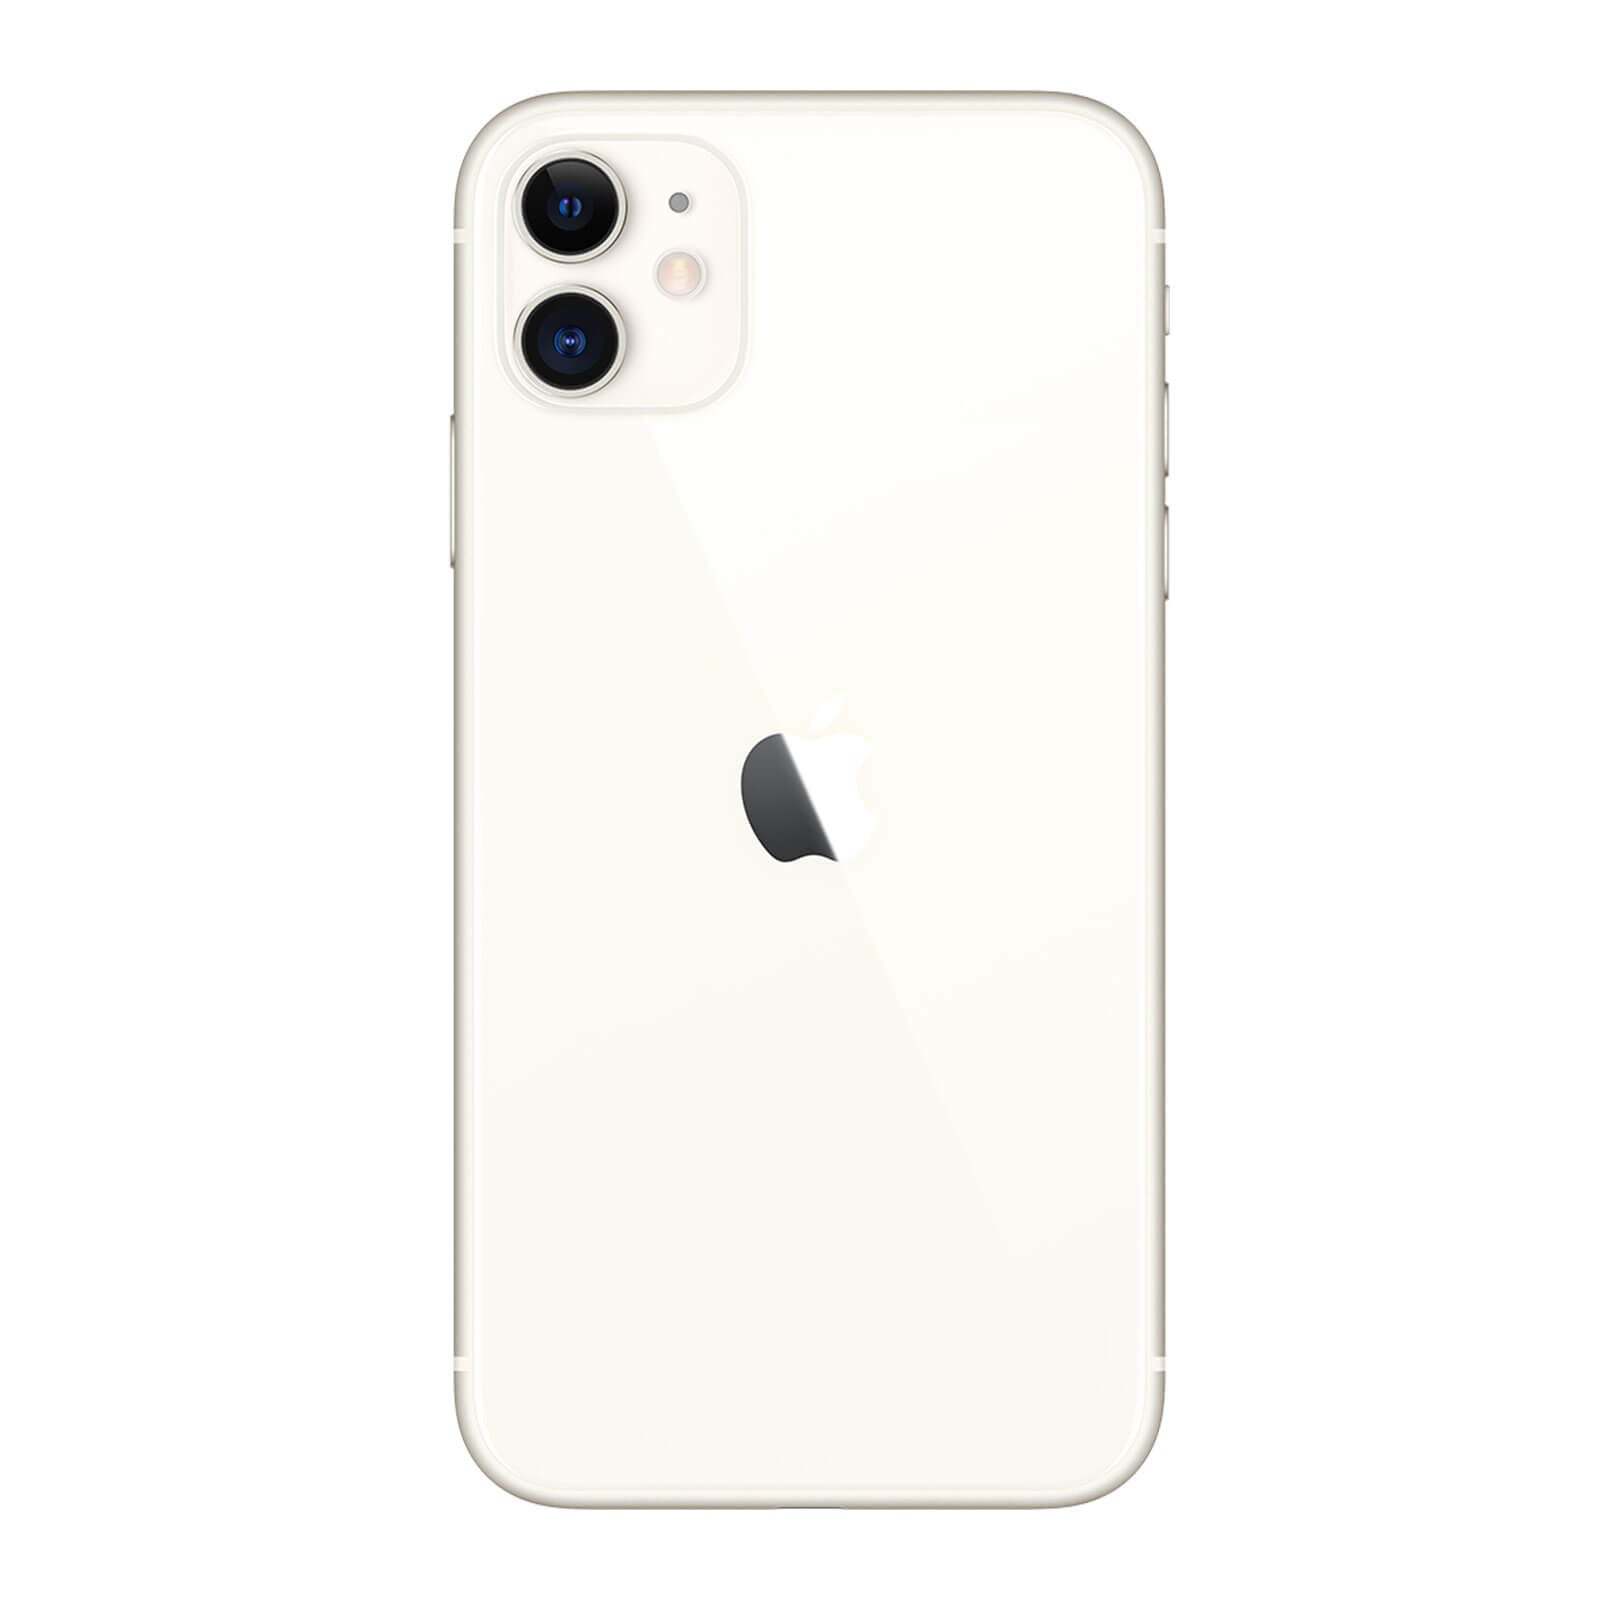 Apple iPhone 11 128GB White Very Good - T-Mobile